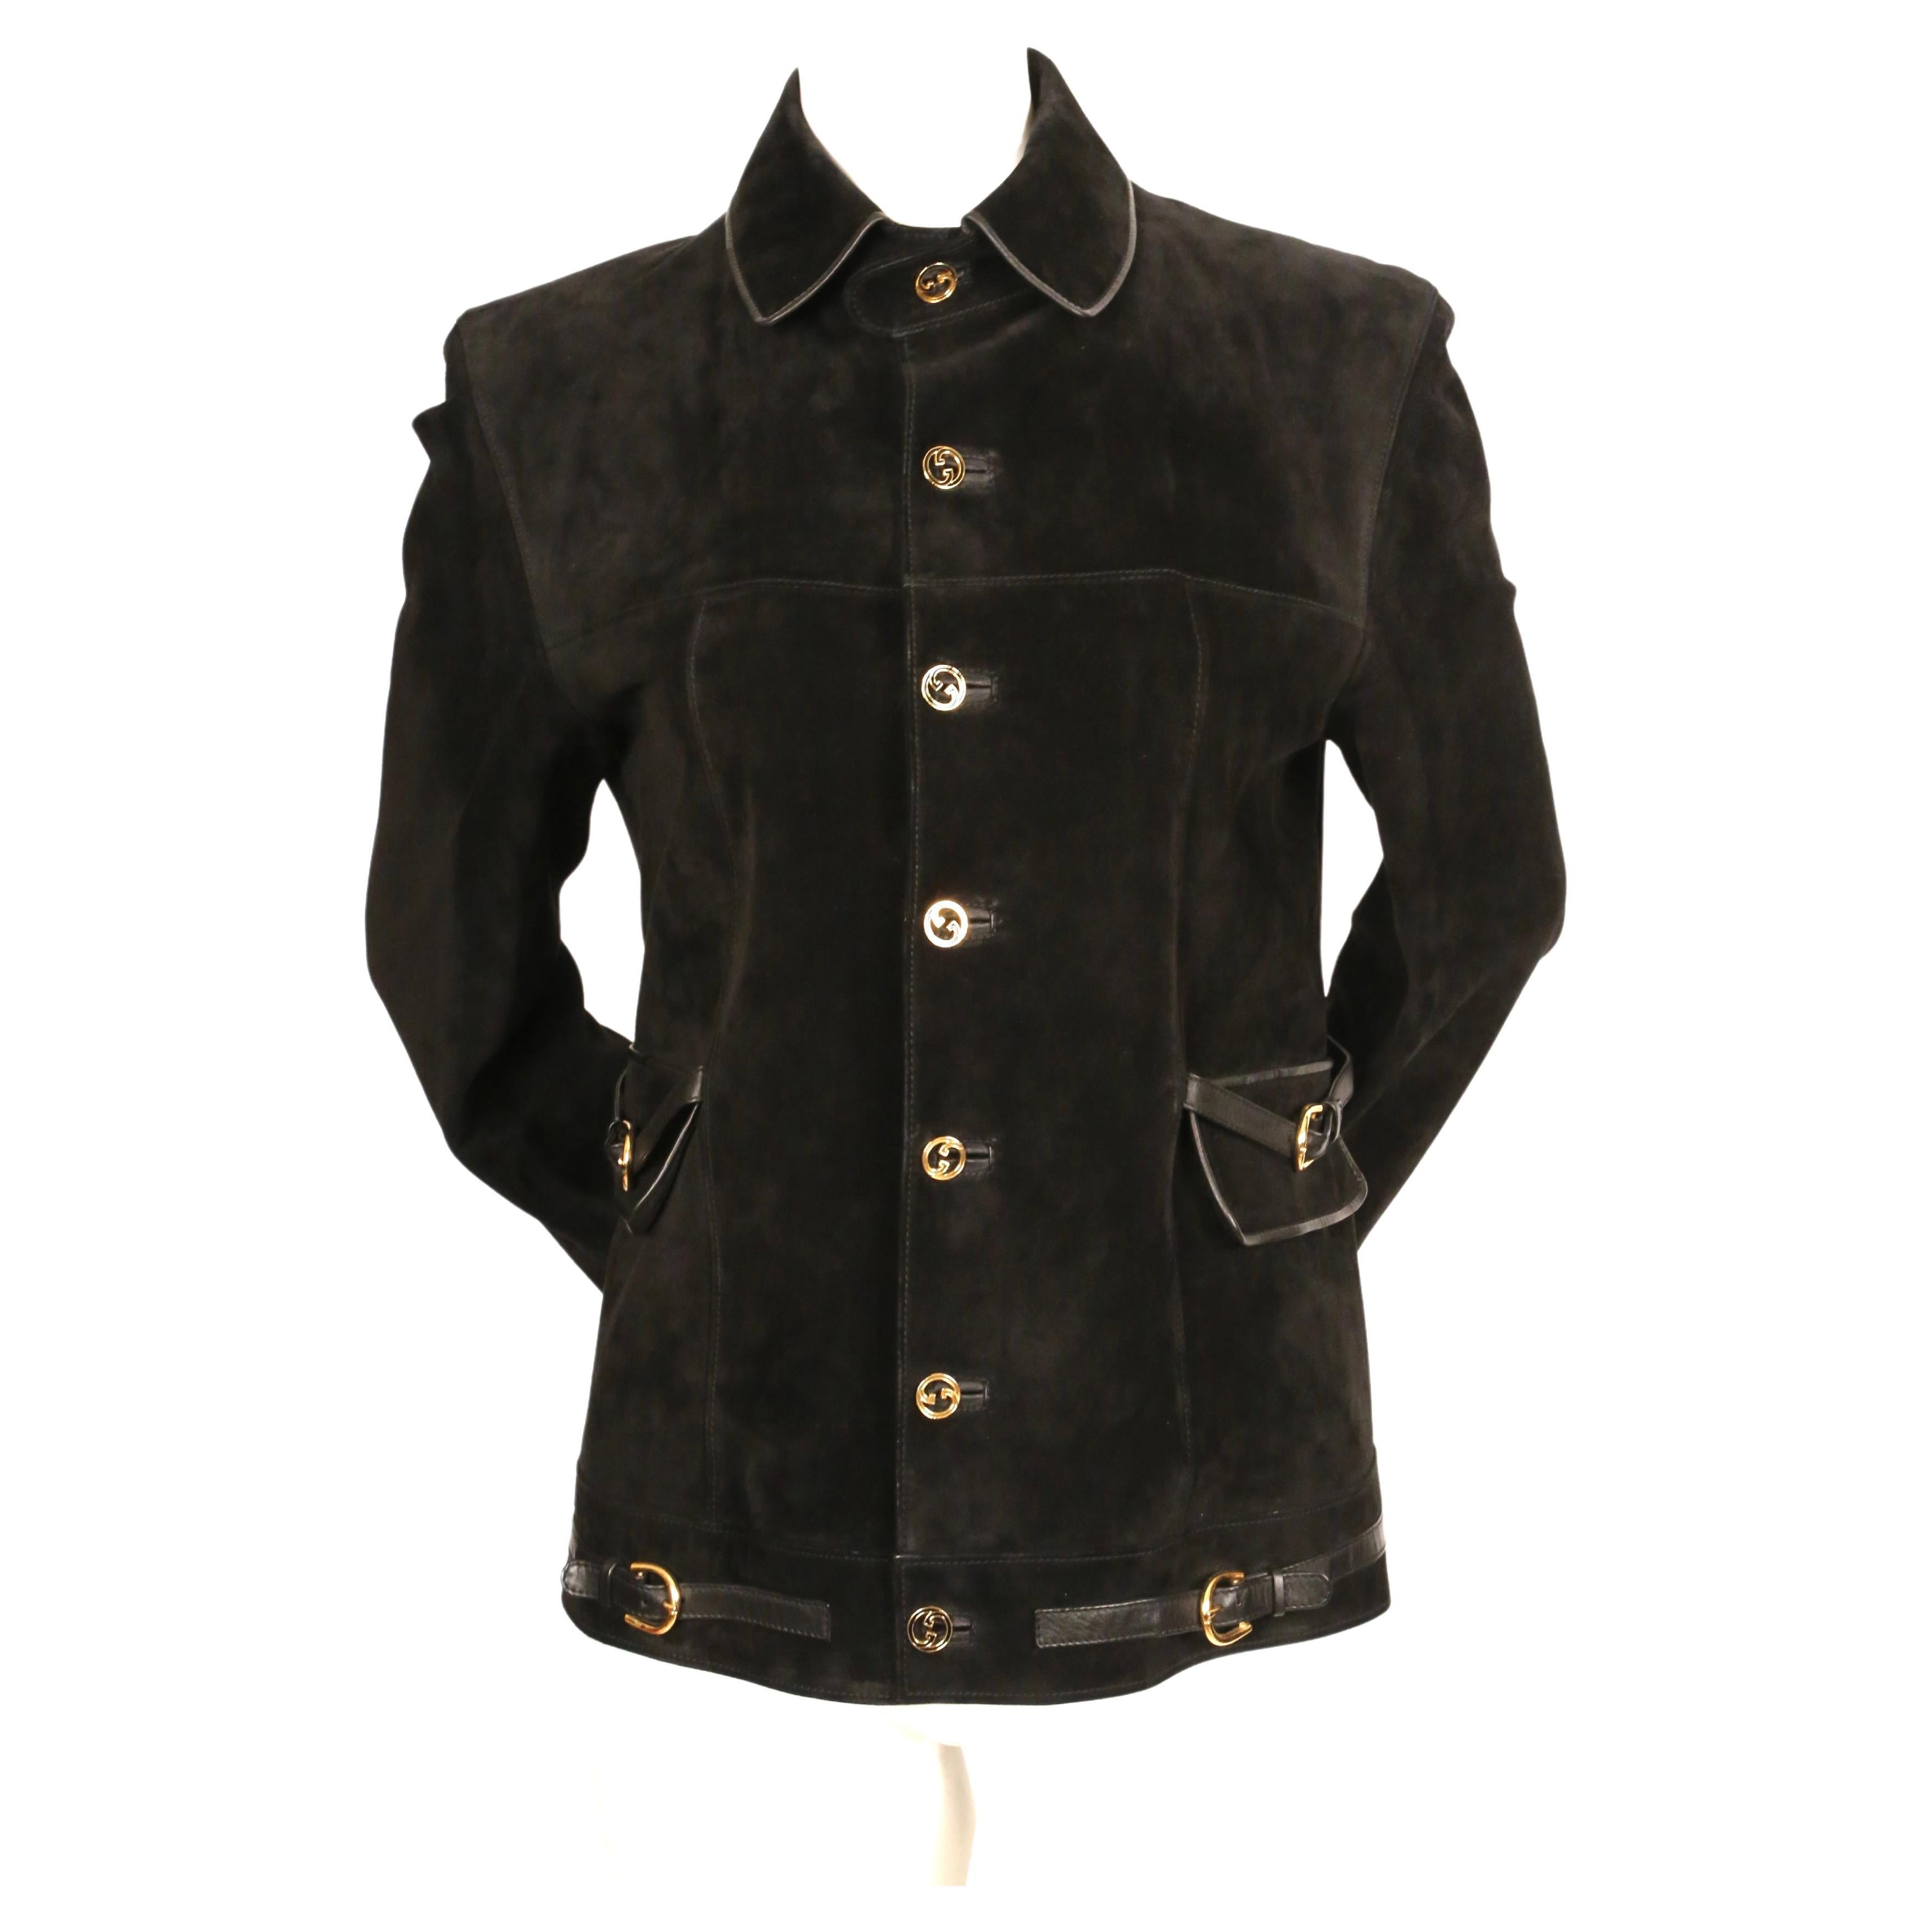 Black suede jacket with gilt hardware, buckles and leather trim from Gucci dating to the 1970's. This jacket is labeled a size 50 so it was probably originally a men's jacket although it fits a woman as well. Jacket was not clipped on the size 2